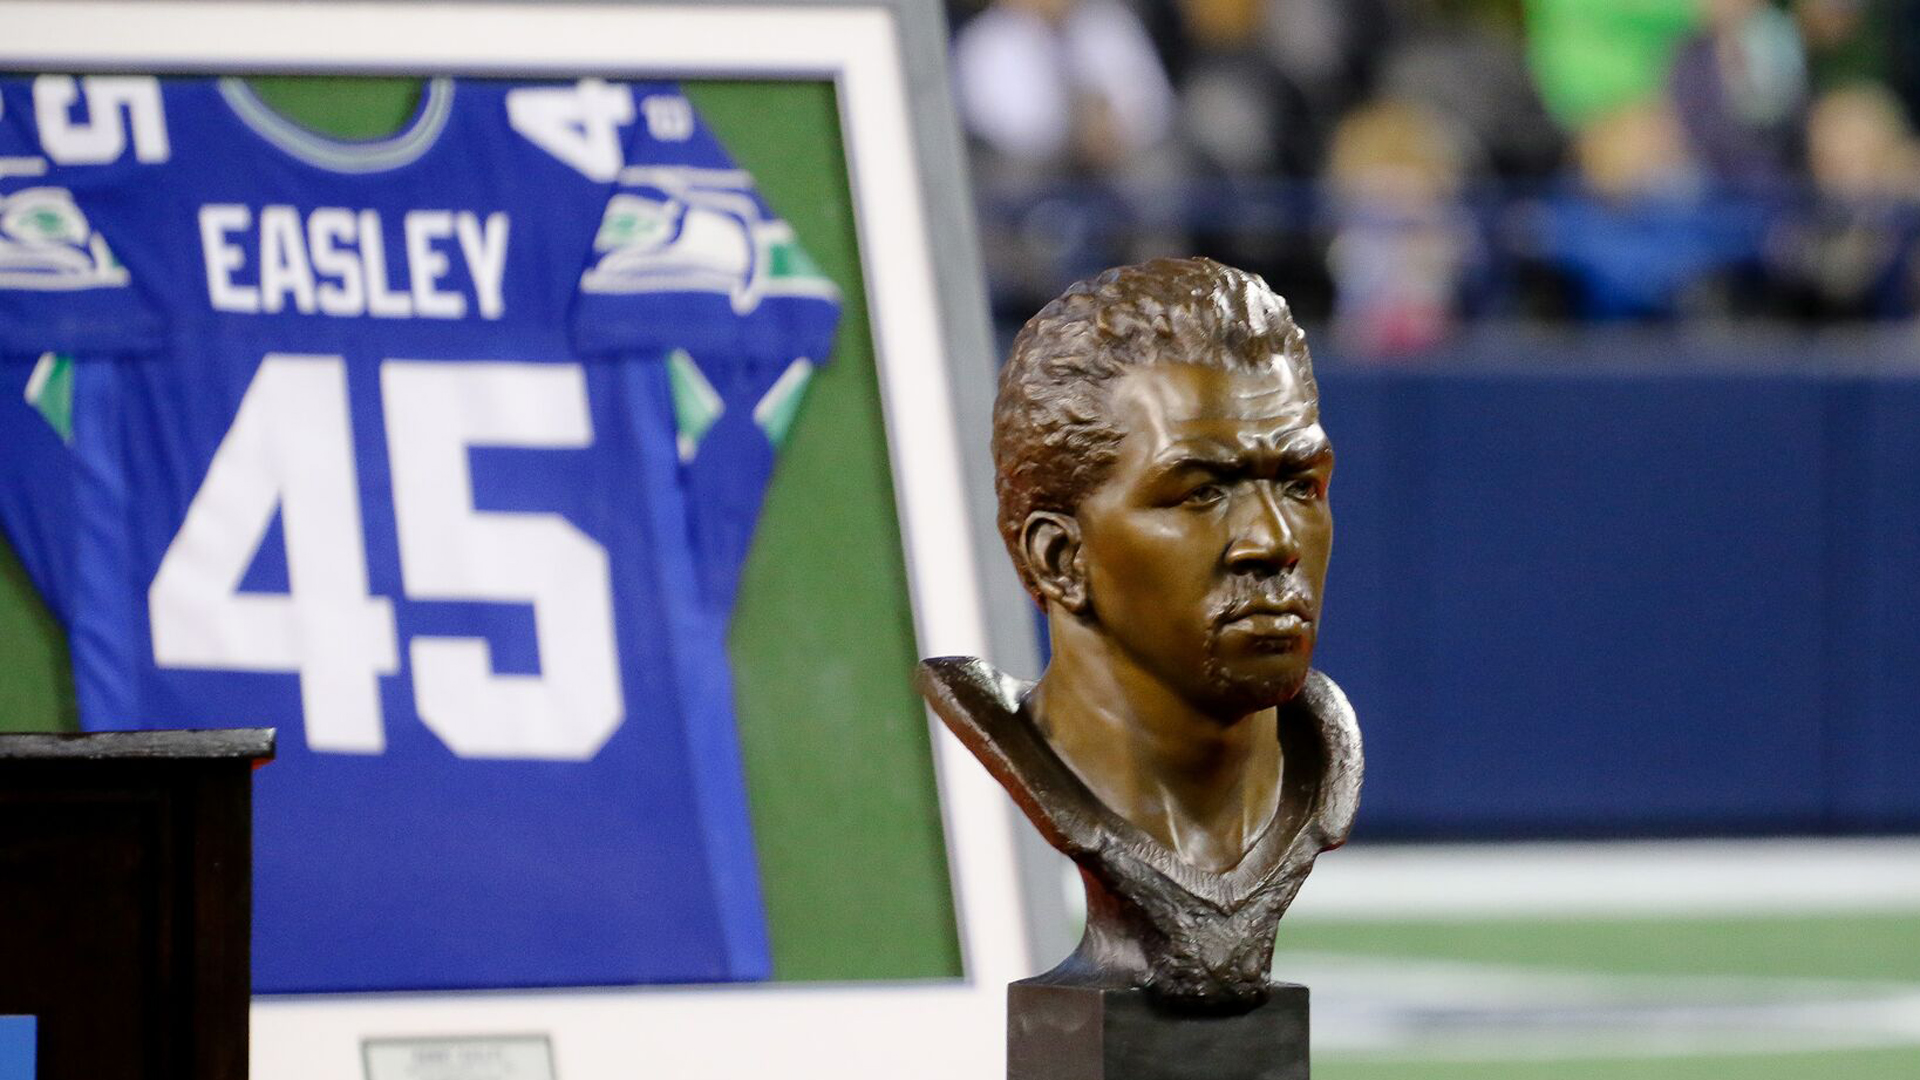 Seahawks to retire Kenny Easley's jersey number 45 on Sunday